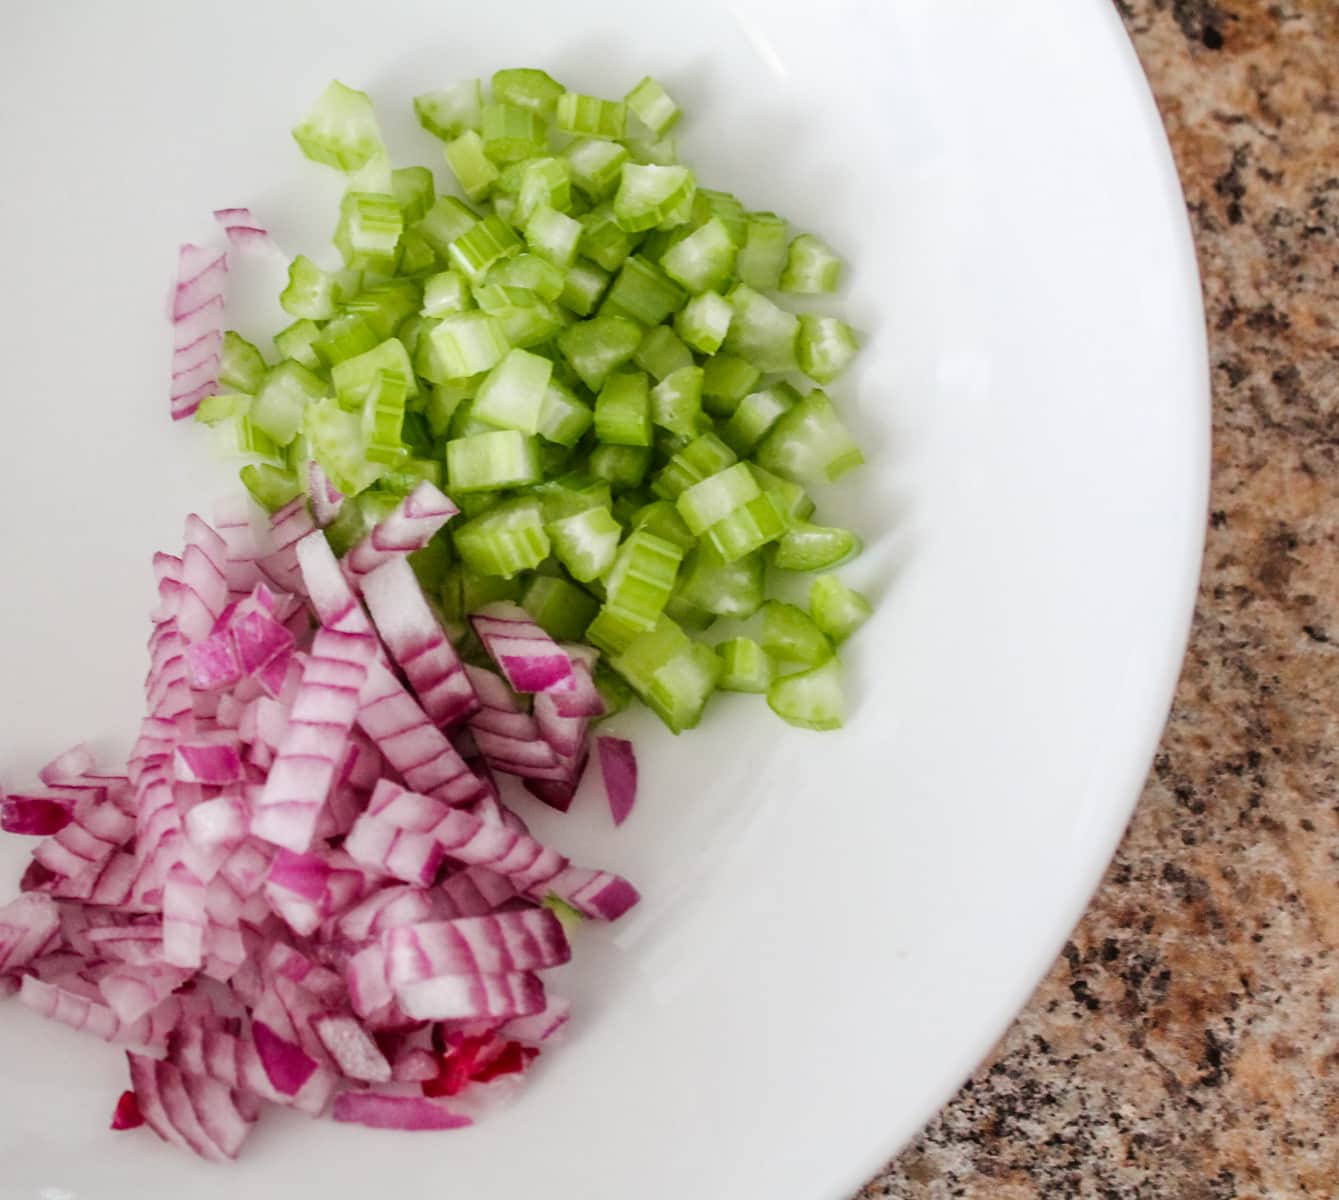 chopped celery and red onion in a bowl.